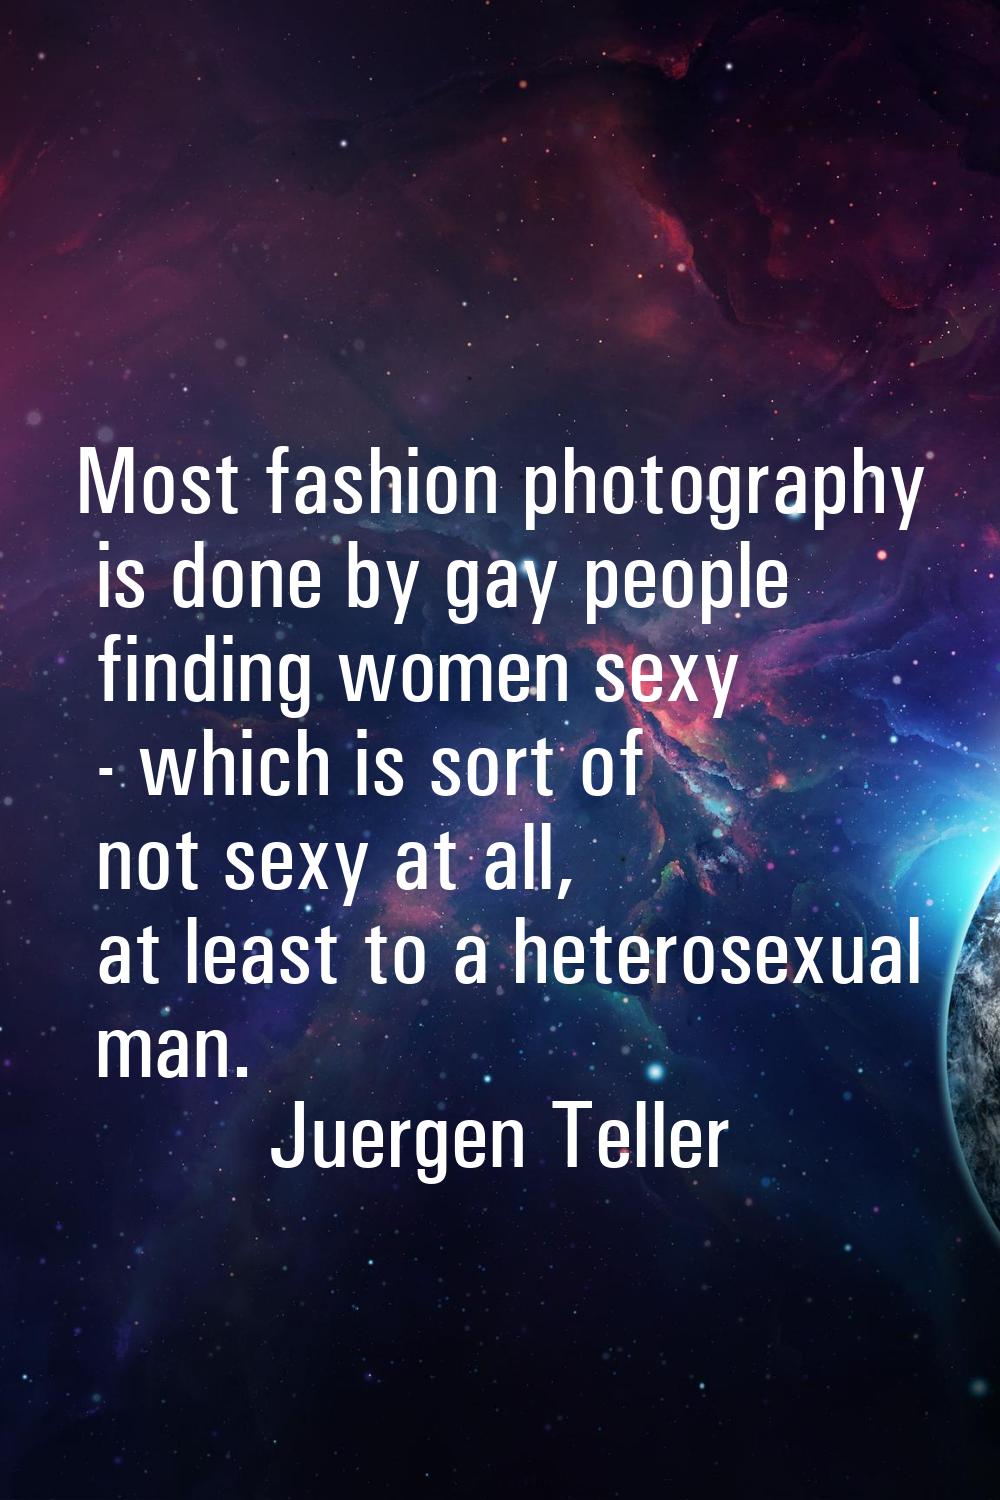 Most fashion photography is done by gay people finding women sexy - which is sort of not sexy at al